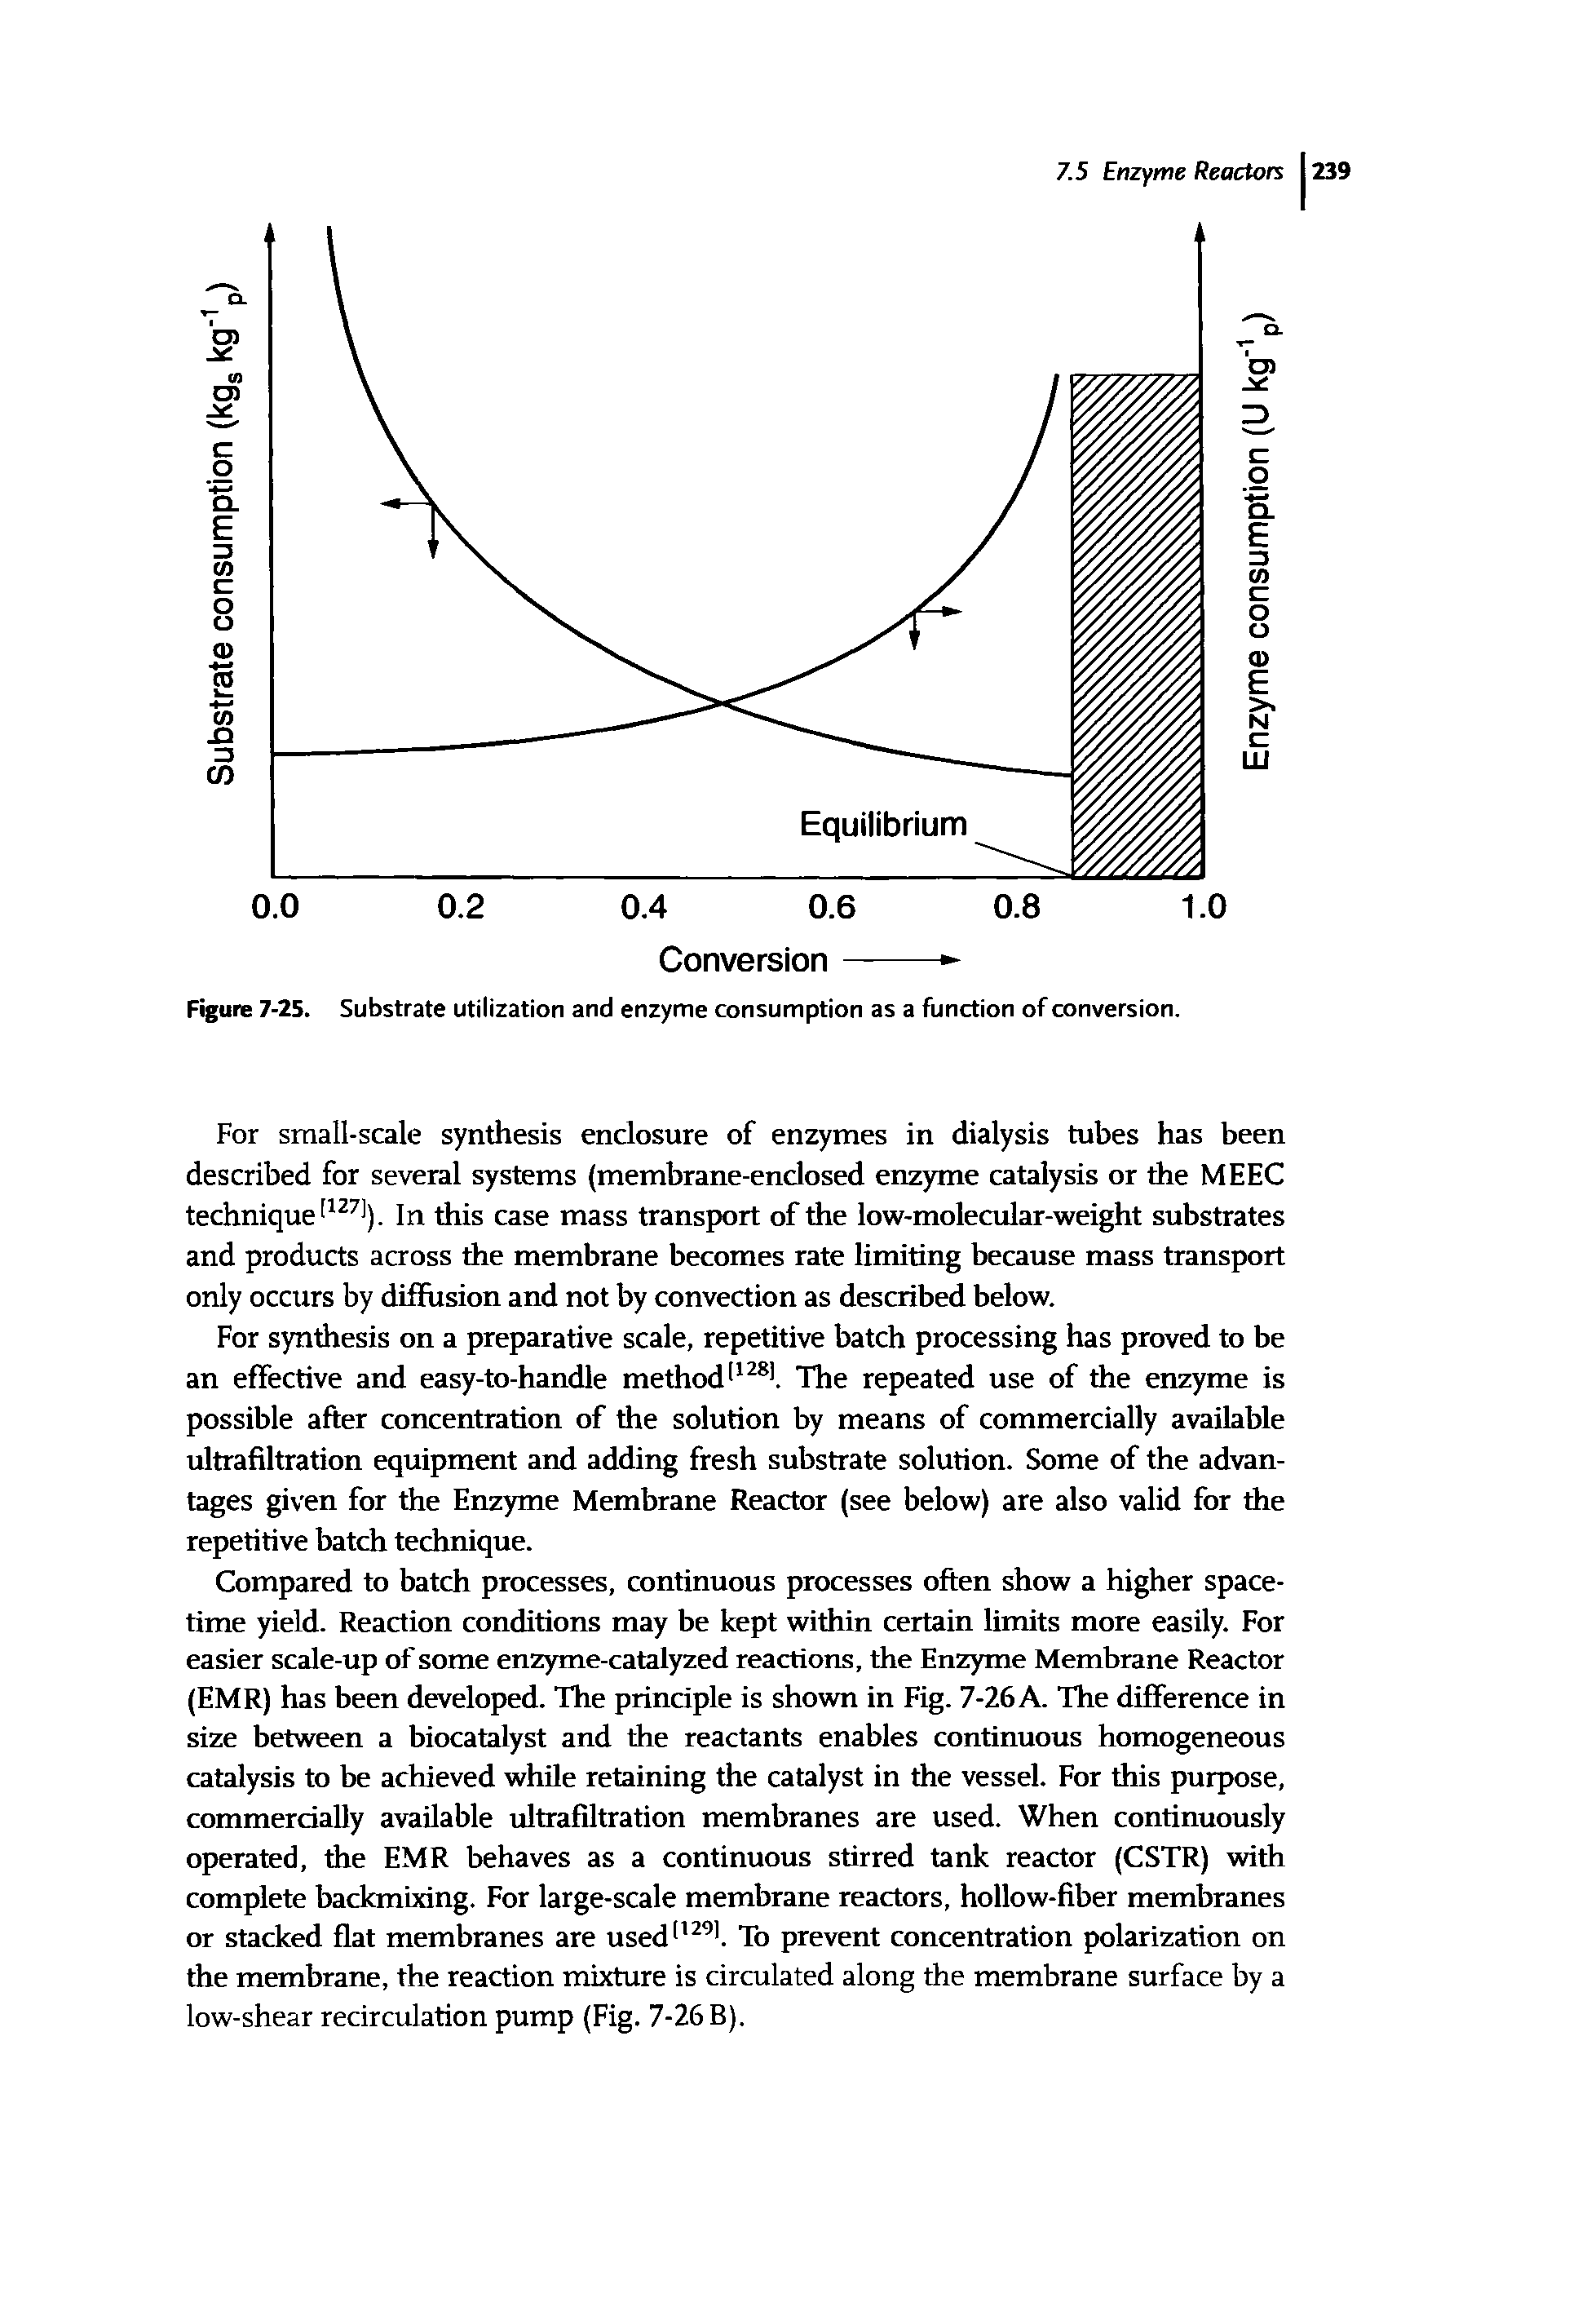 Figure 7-25. Substrate utilization and enzyme consumption as a function of conversion.